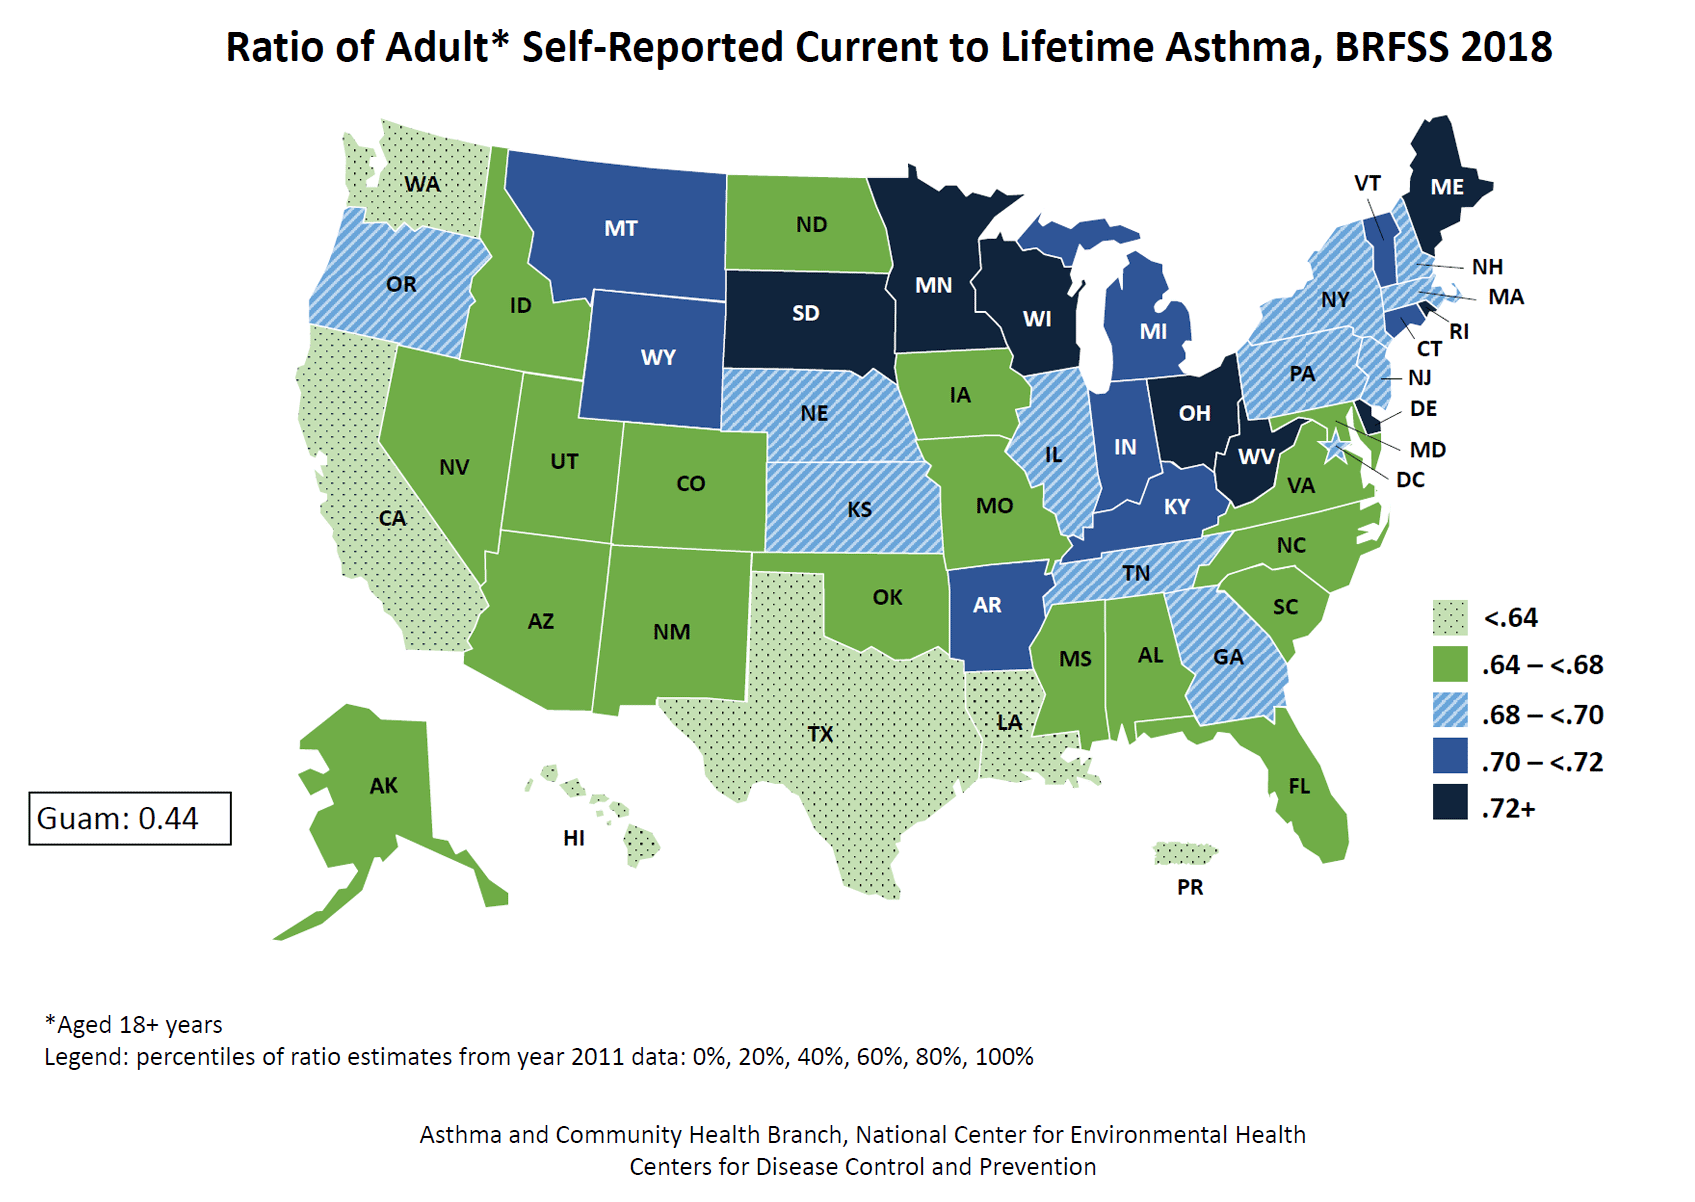 U.S. map showing ratio of adult self-reported current to lifetime asthma by state for BRFSS 2018